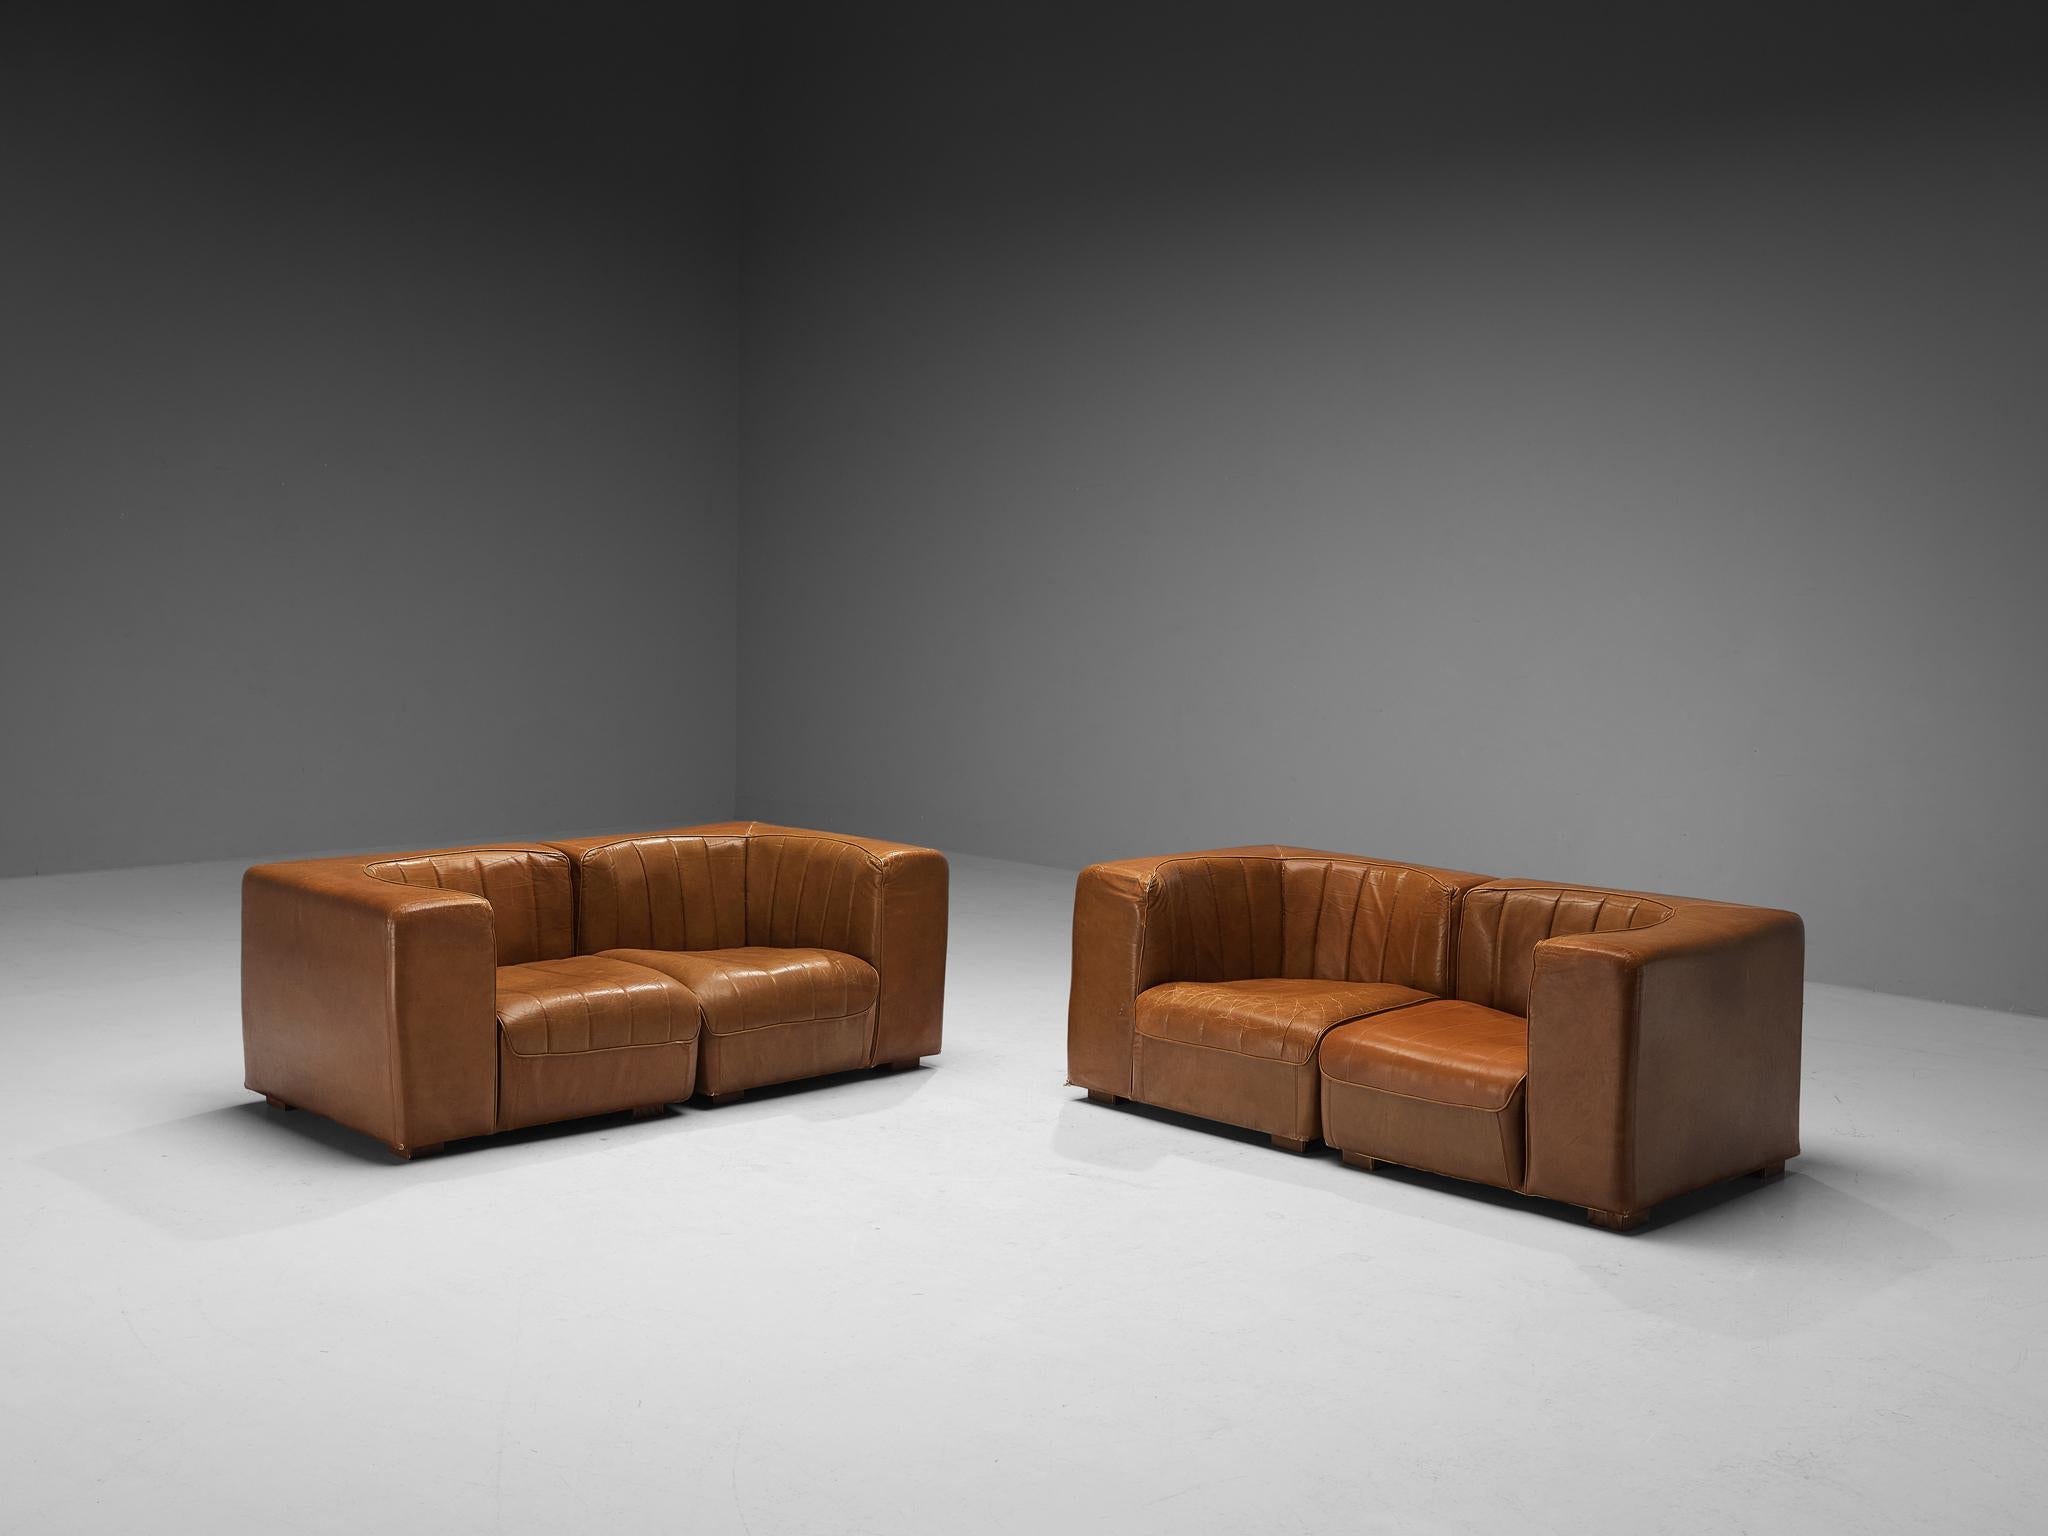 Tito Agnoli for Arflex, two seater sofas, model '9000', patinated leather, wood, Italy, 1969

This design is characterized by a cubic outer frame that provides a visually interesting contrast to the round seat. When seated you experience a pleasant